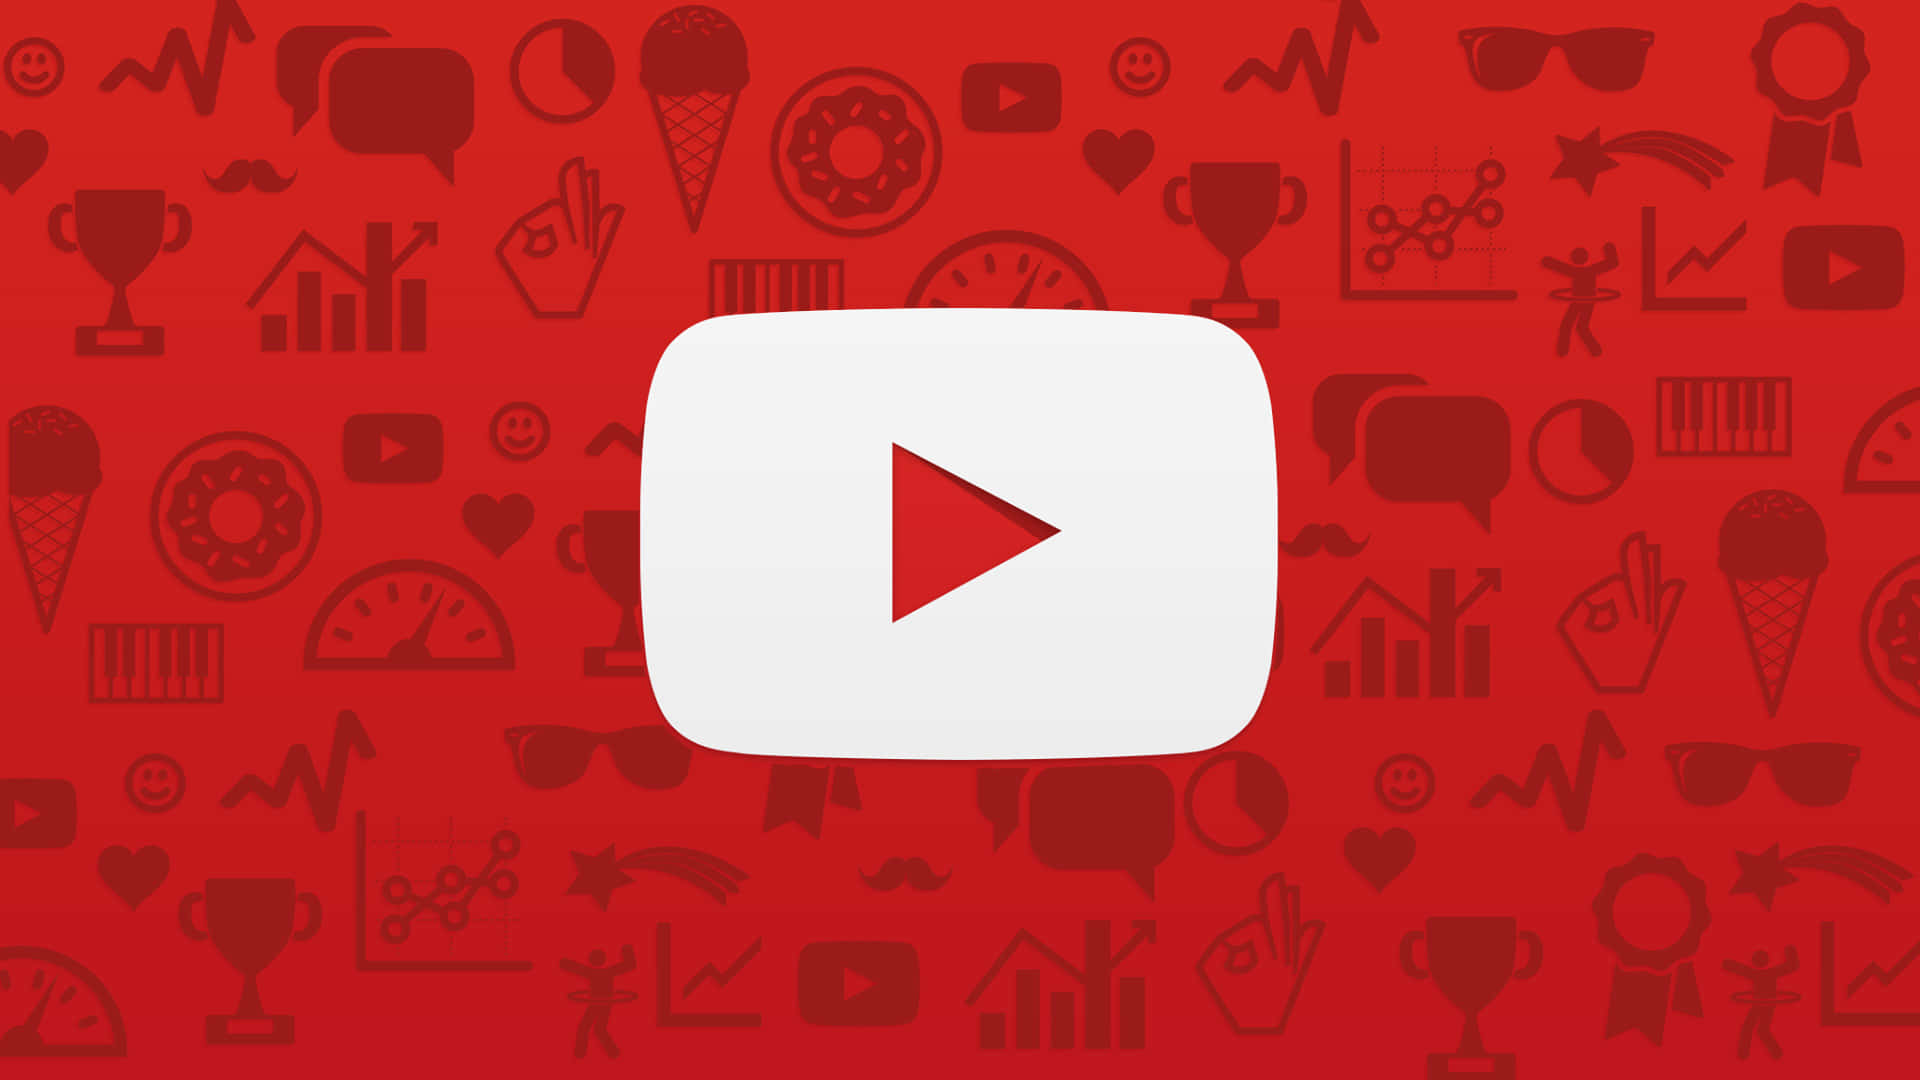 Youtube Logo With Icons On A Red Background